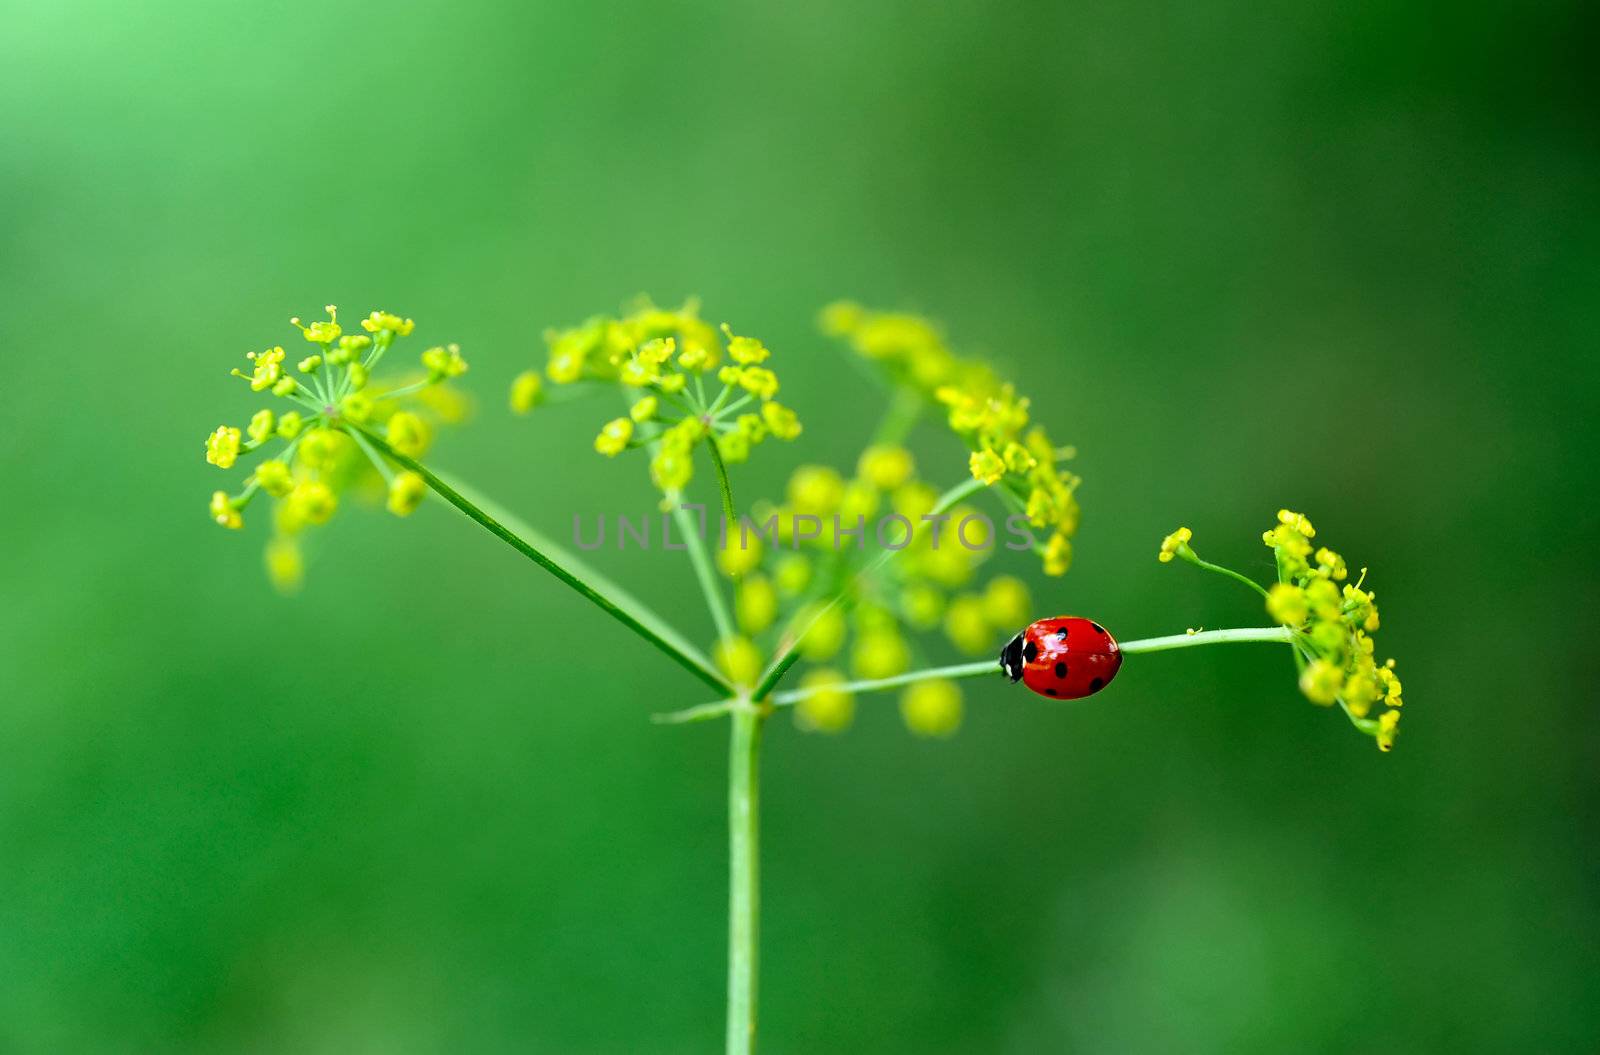 An image of a tiny red ladybird on a plant